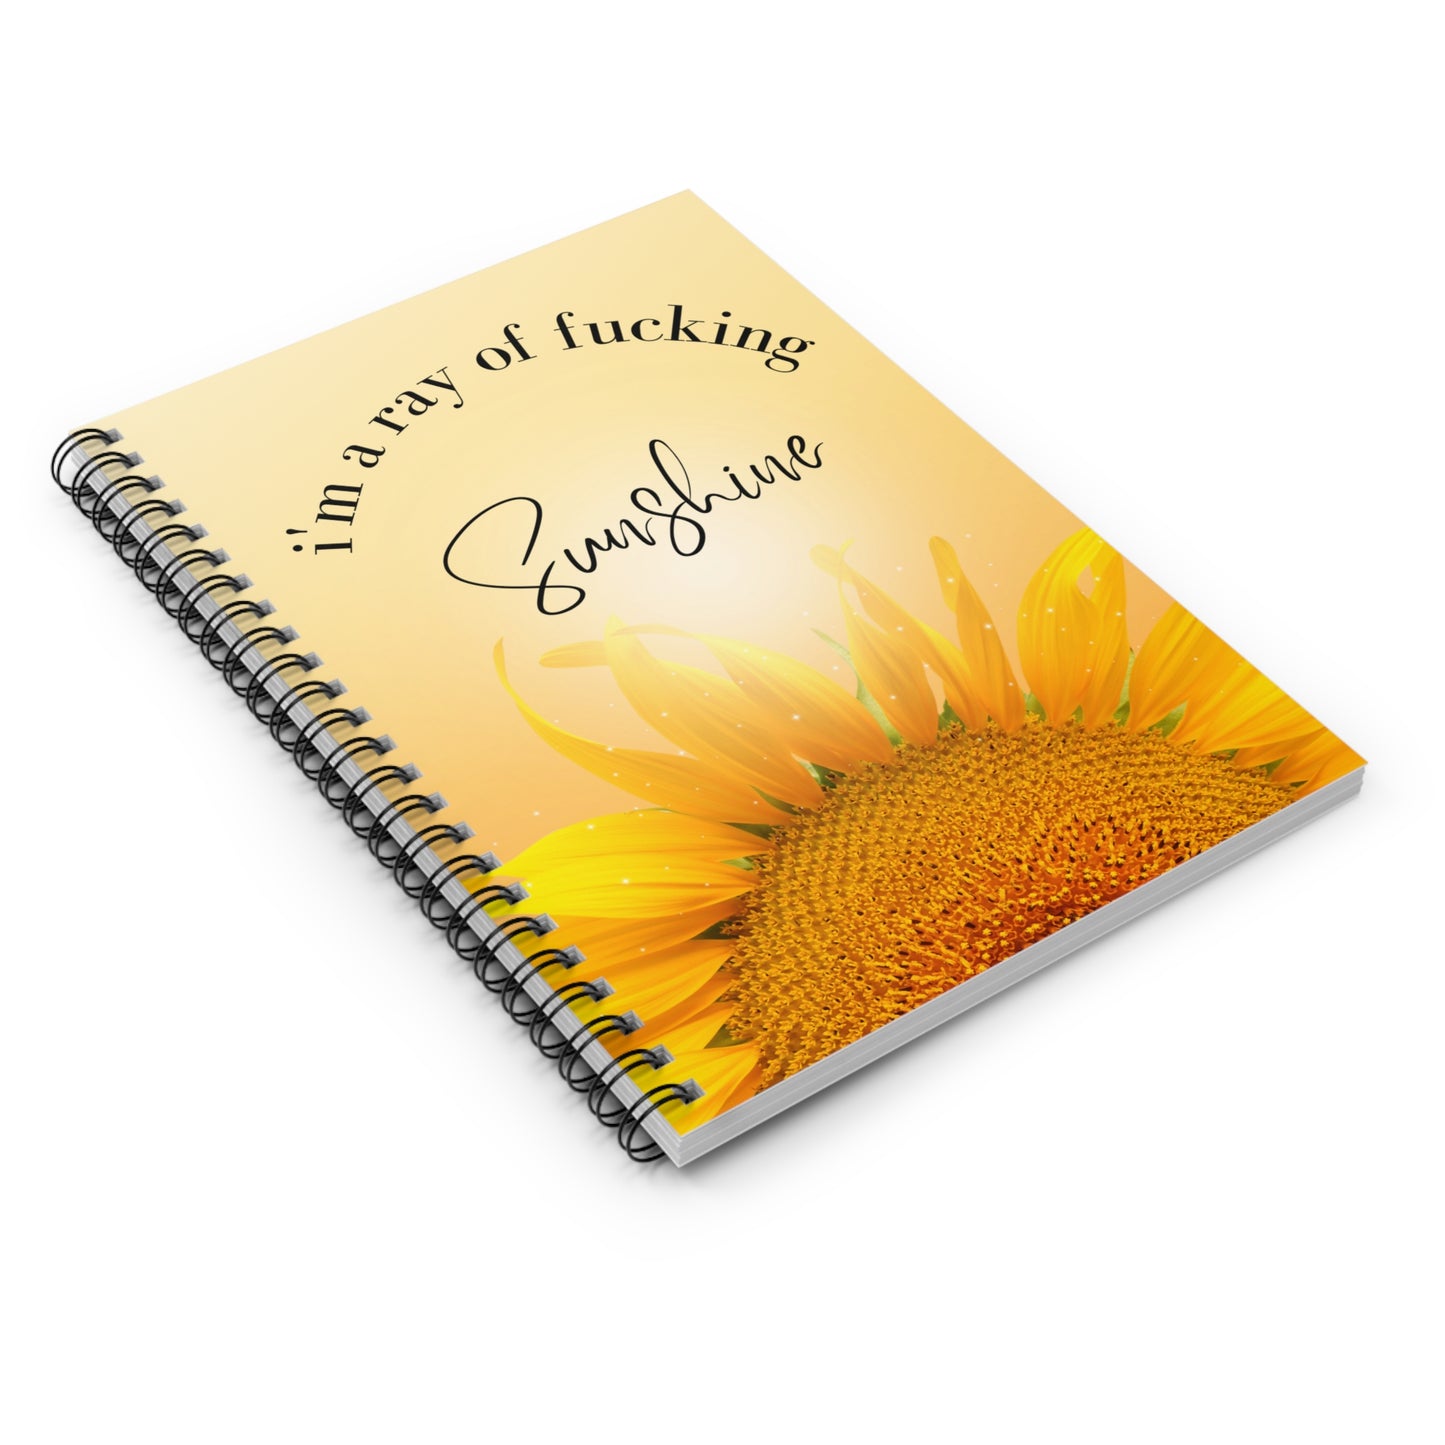 I'm a Ray of Fucking Sunshine | Spiral Notebook